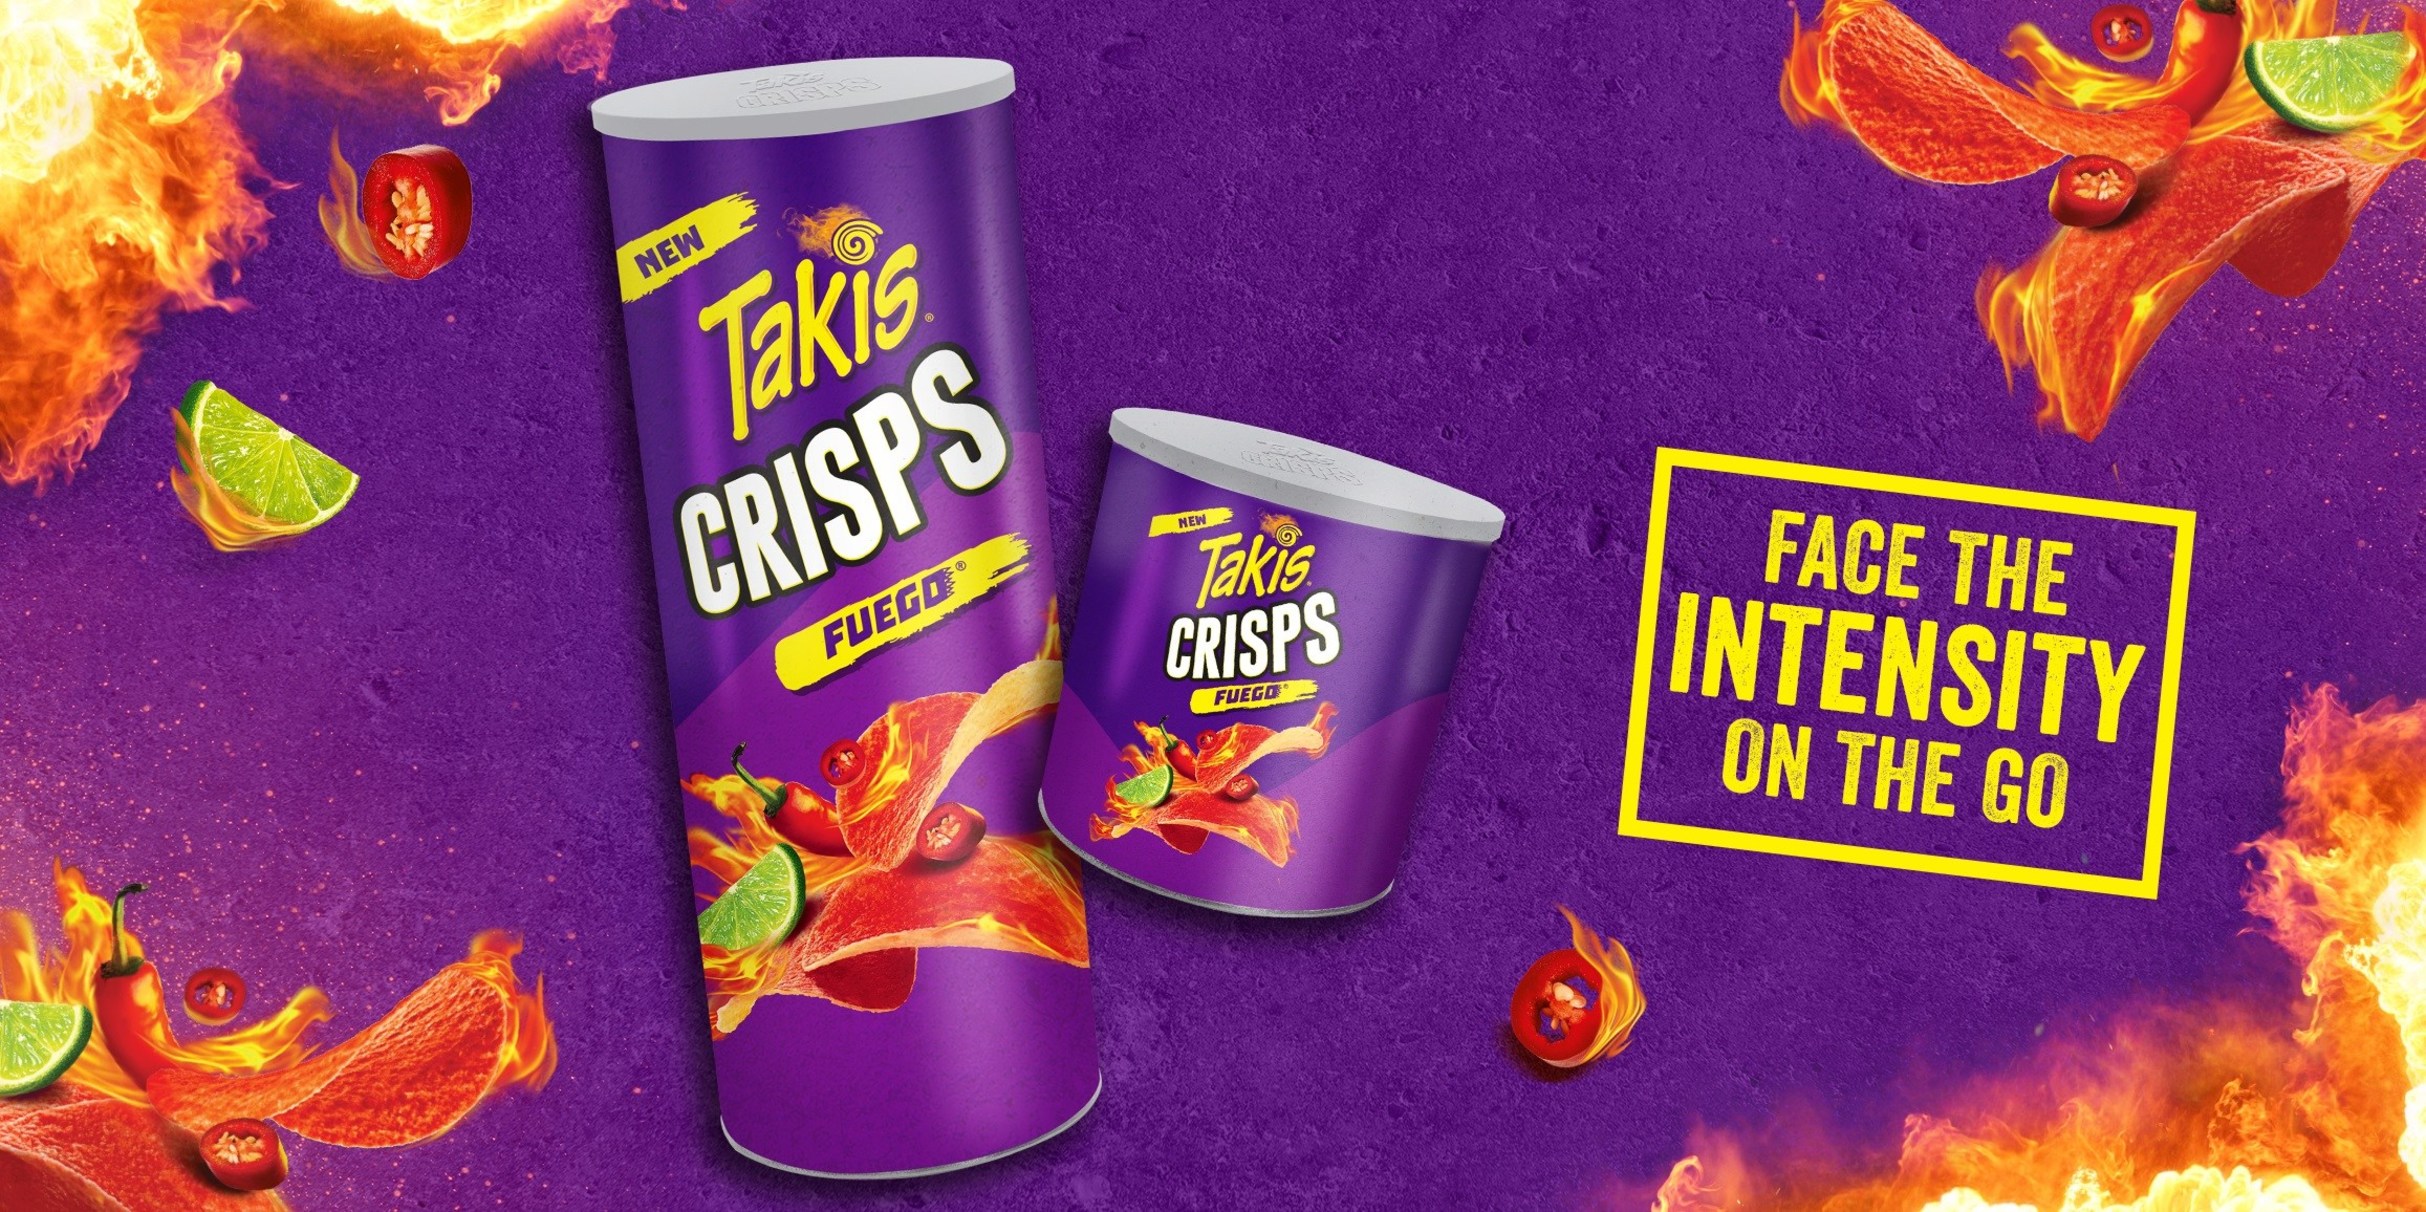 Takis® Introduces On-the-Go Intensity with New Takis® Crisps